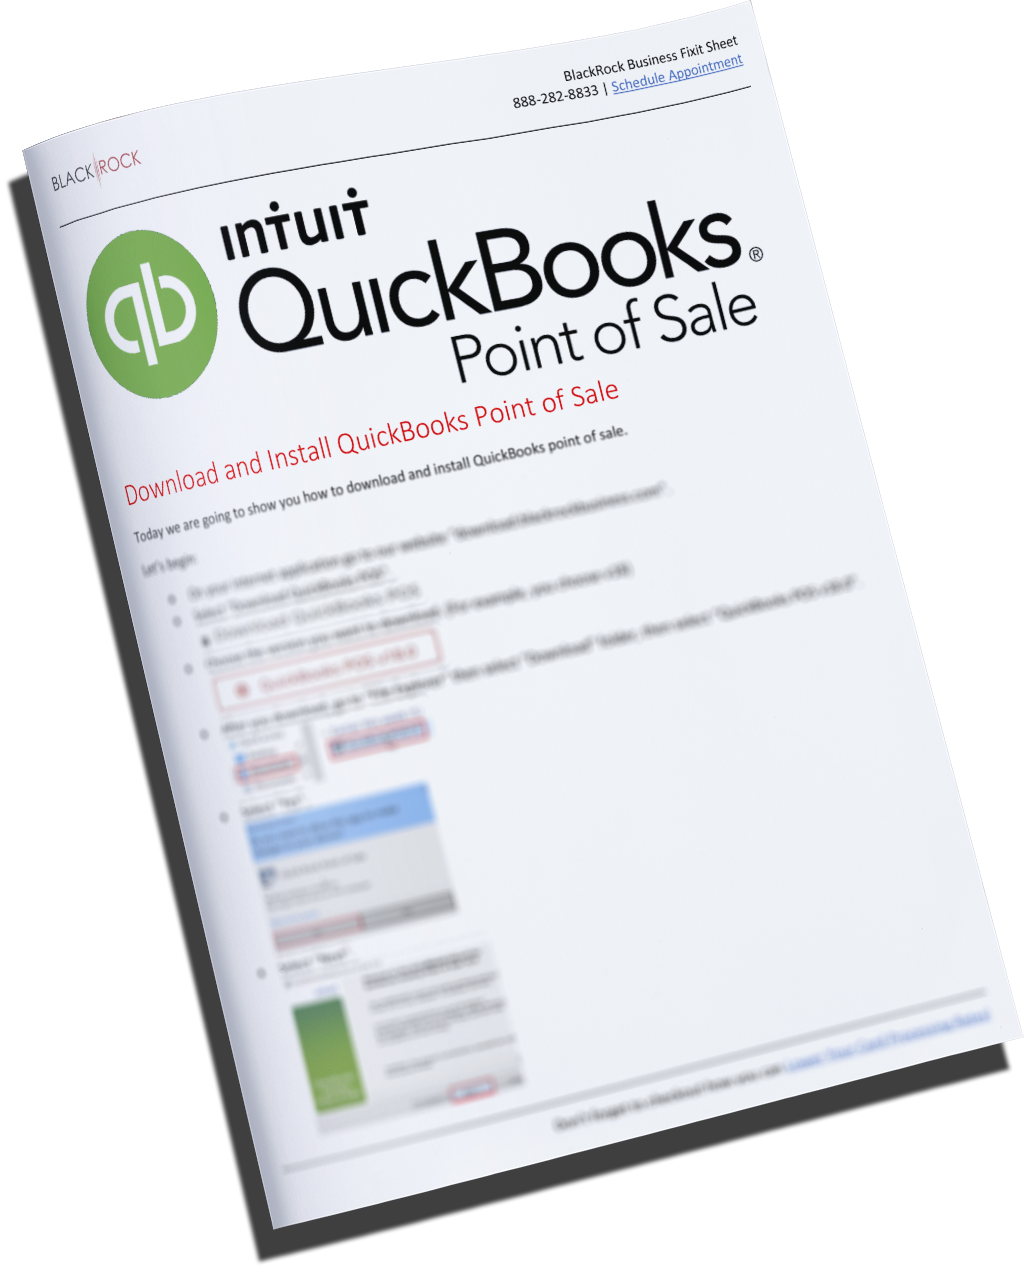 Download and Install QuickBooks Point of Sale